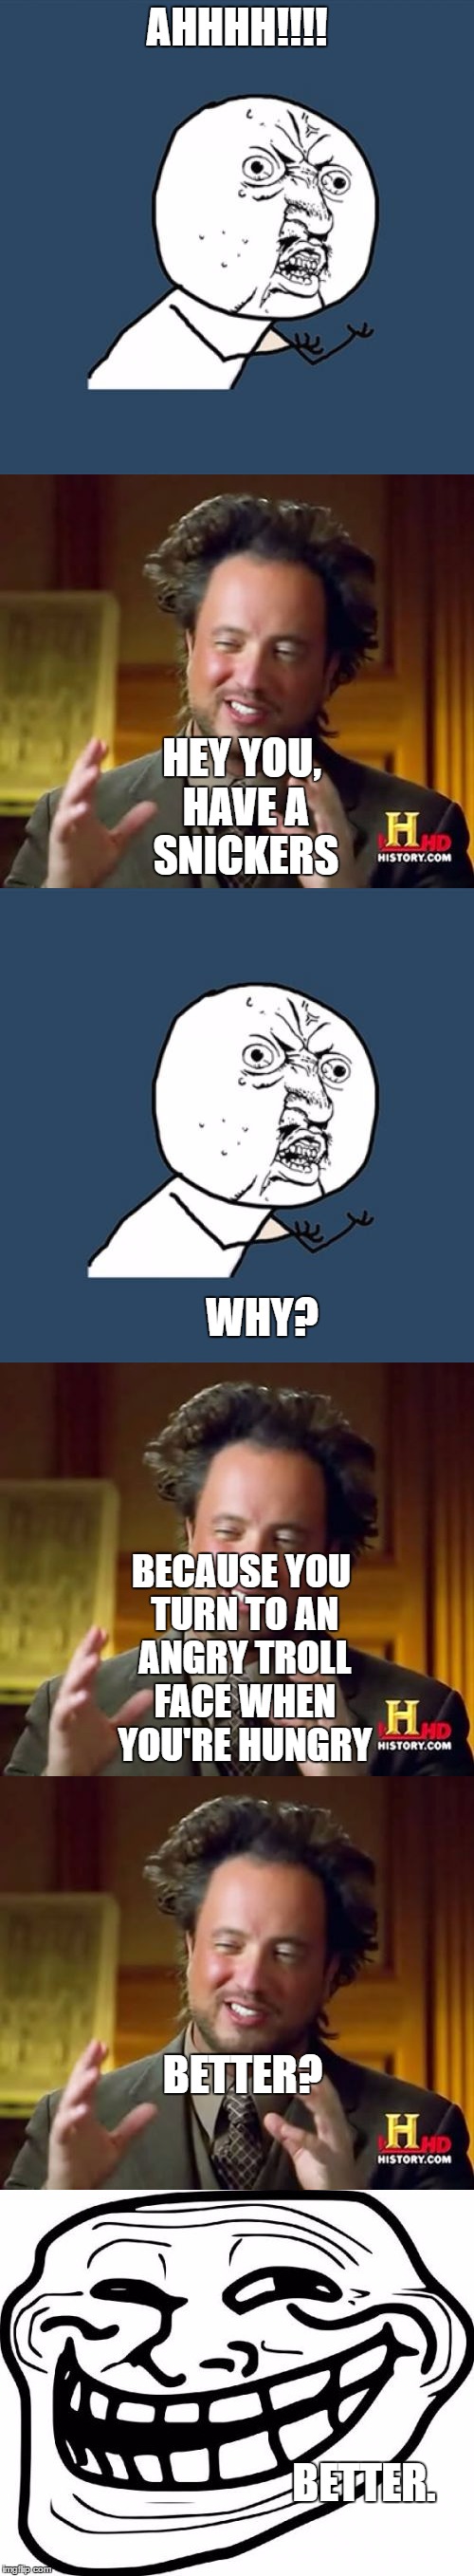 Have a snickers! | AHHHH!!!! HEY YOU, HAVE A SNICKERS; WHY? BECAUSE YOU TURN TO AN ANGRY TROLL FACE WHEN YOU'RE HUNGRY; BETTER? BETTER. | image tagged in ancient aliens,y u no,troll face,eat a snickers | made w/ Imgflip meme maker